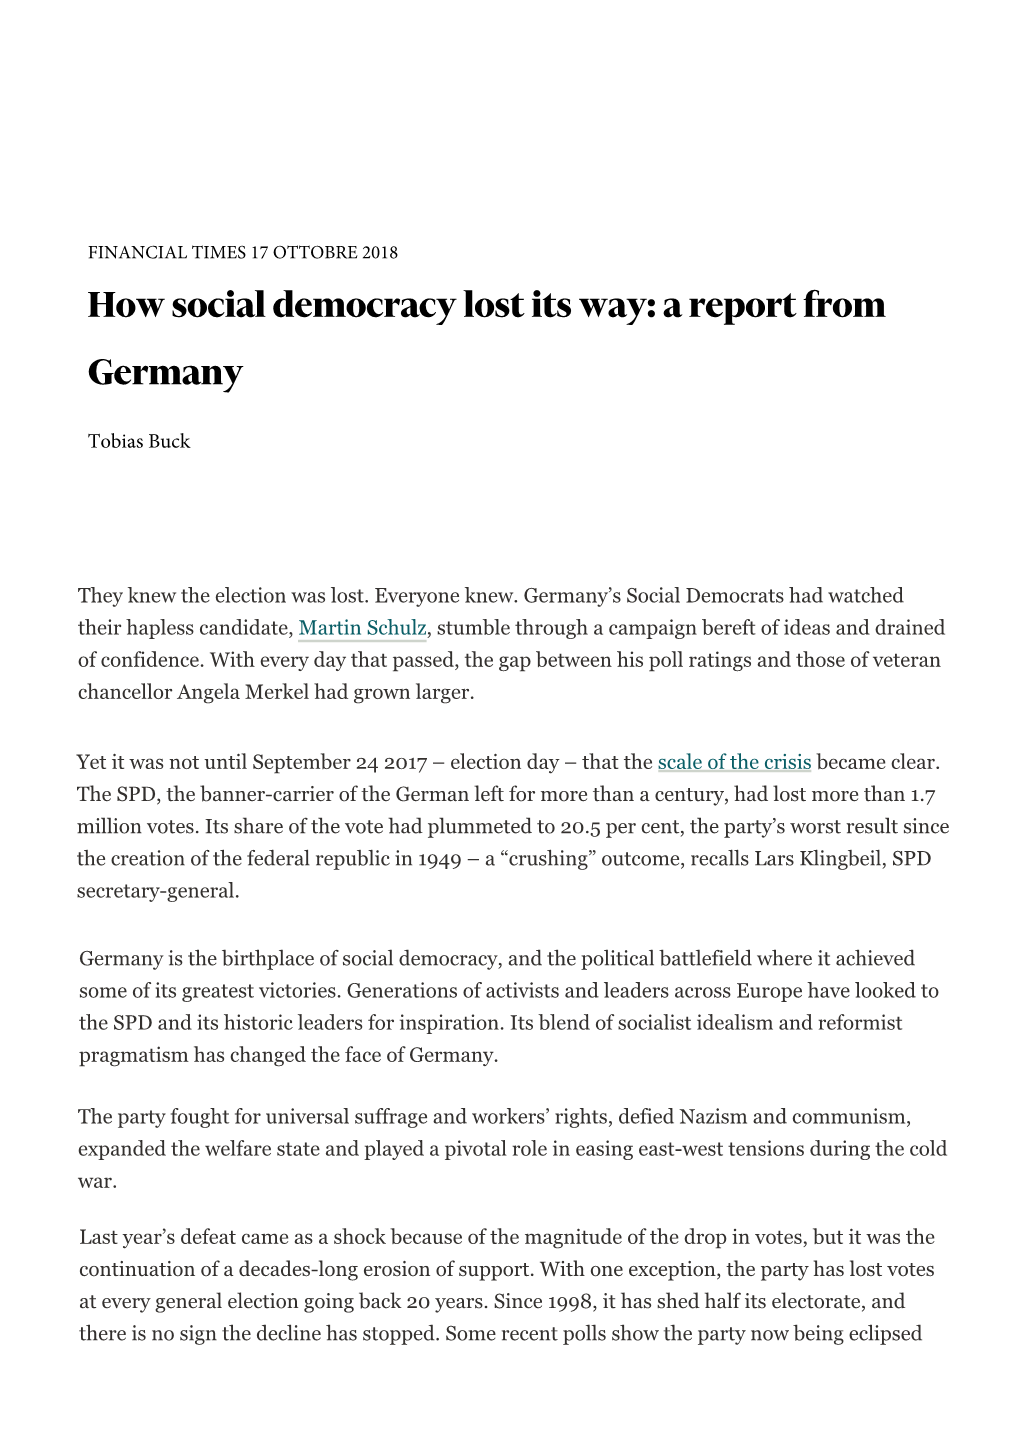 How Social Democracy Lost Its Way: a Report from Germany